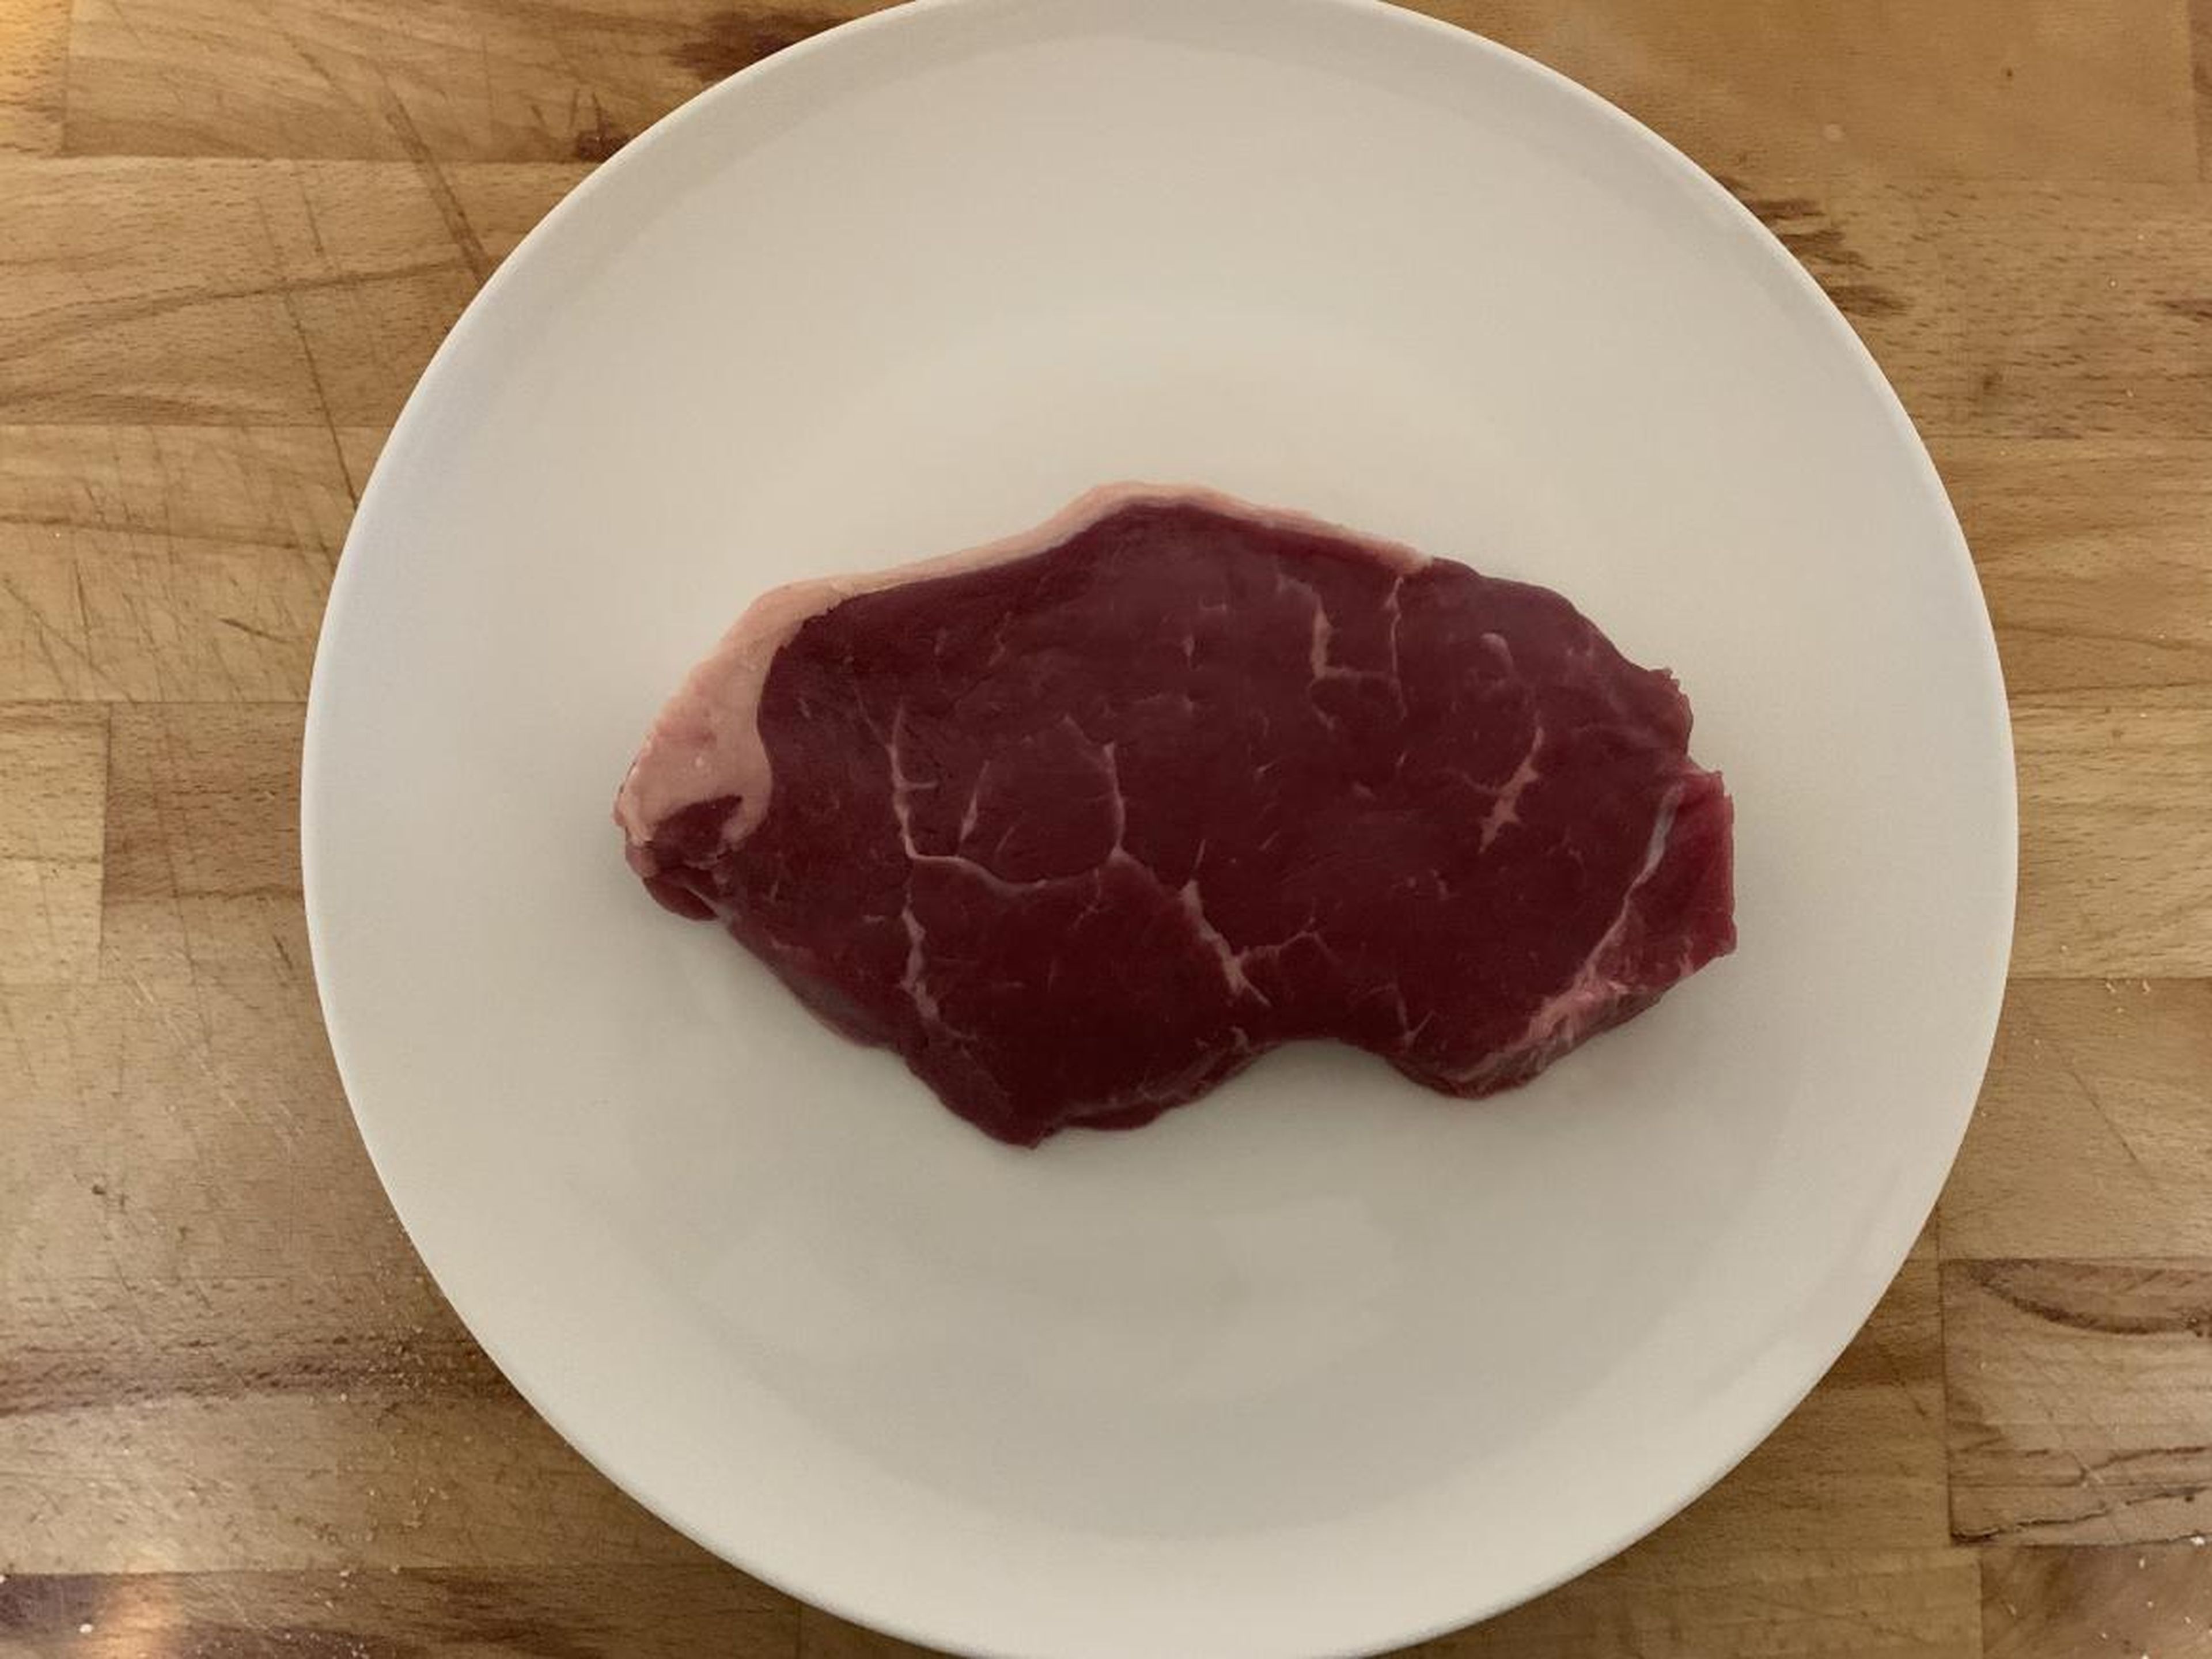 The instructions said to leave the steak out at room temperature for 1-2 hours to prevent it drying out, but she was starving after the gym. "Impatience is part of my nature so I gave it about 30 minutes," she said.